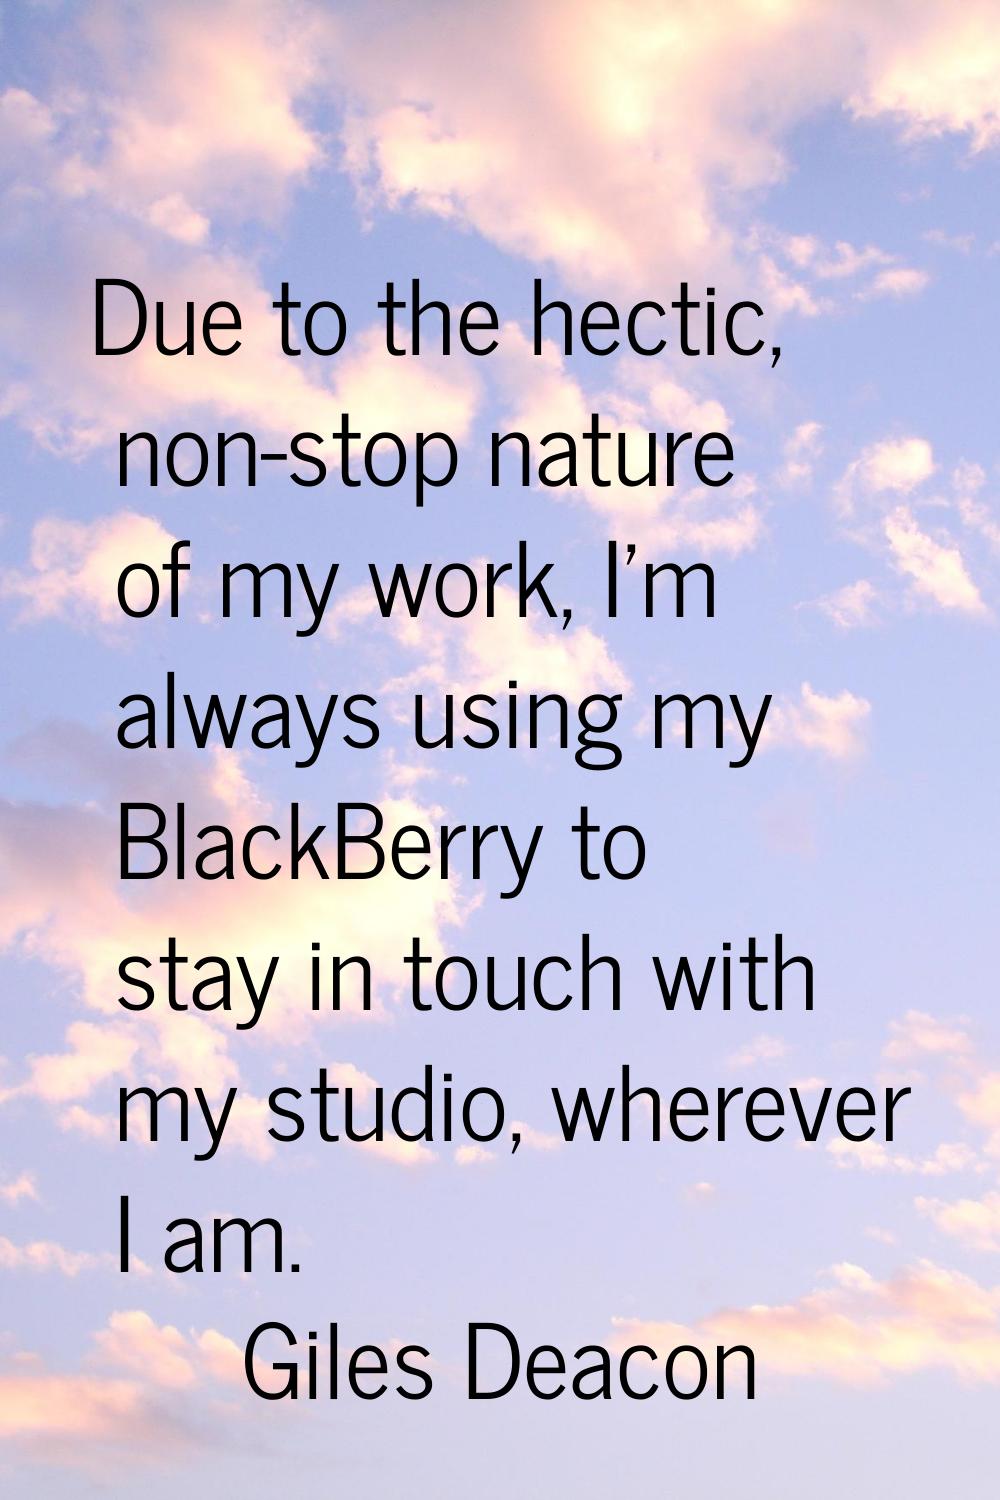 Due to the hectic, non-stop nature of my work, I'm always using my BlackBerry to stay in touch with